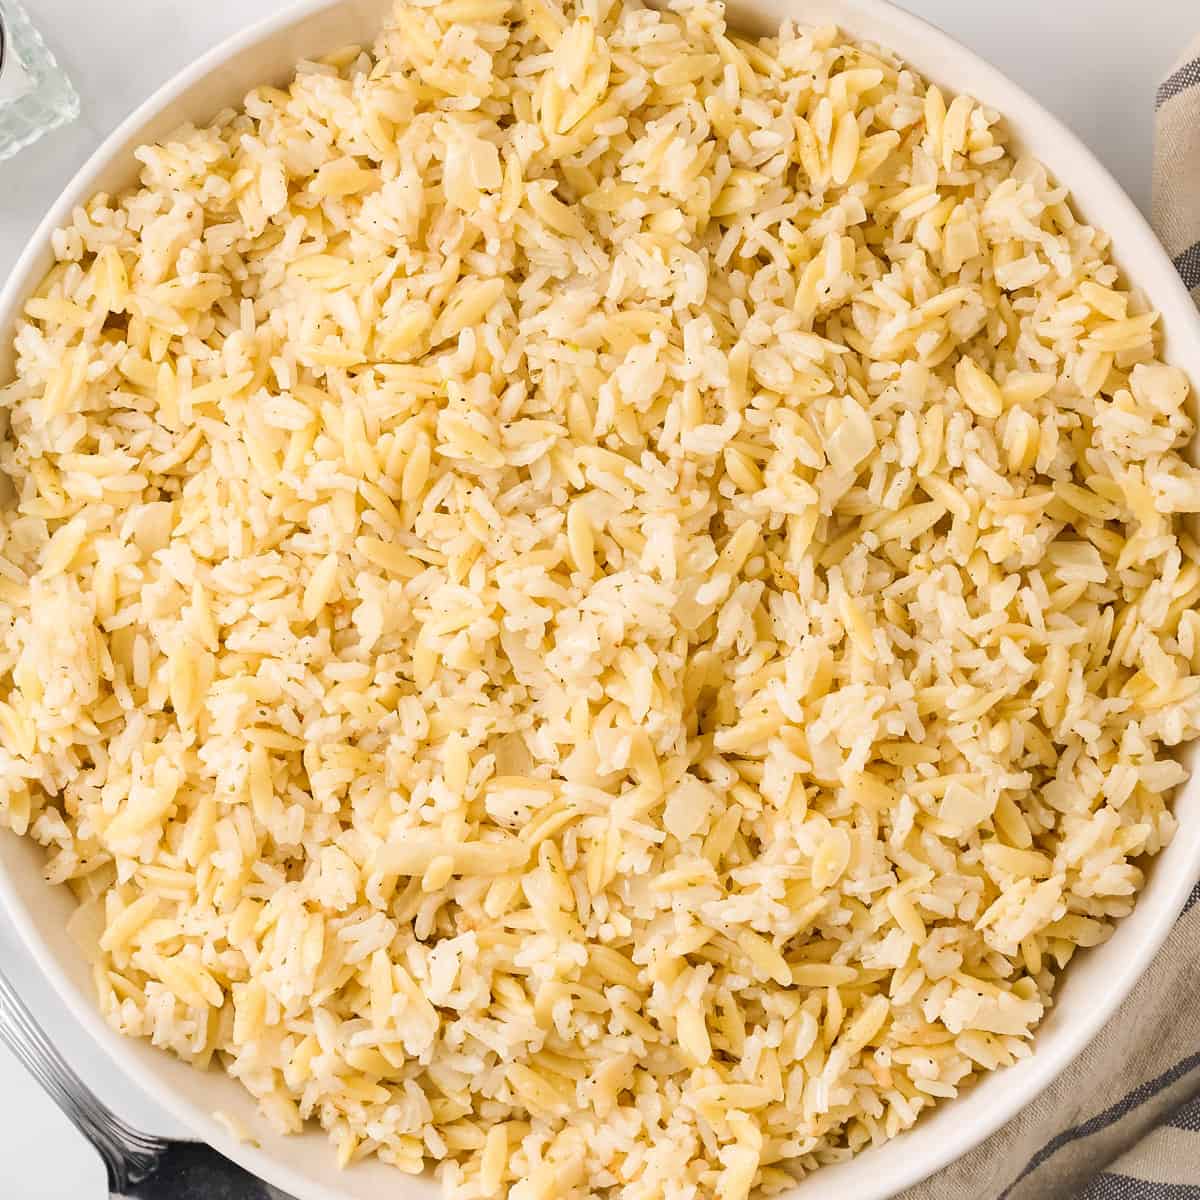 Save on Rice-A-Roni Creamy Four Cheese Flavor Rice Cup Order